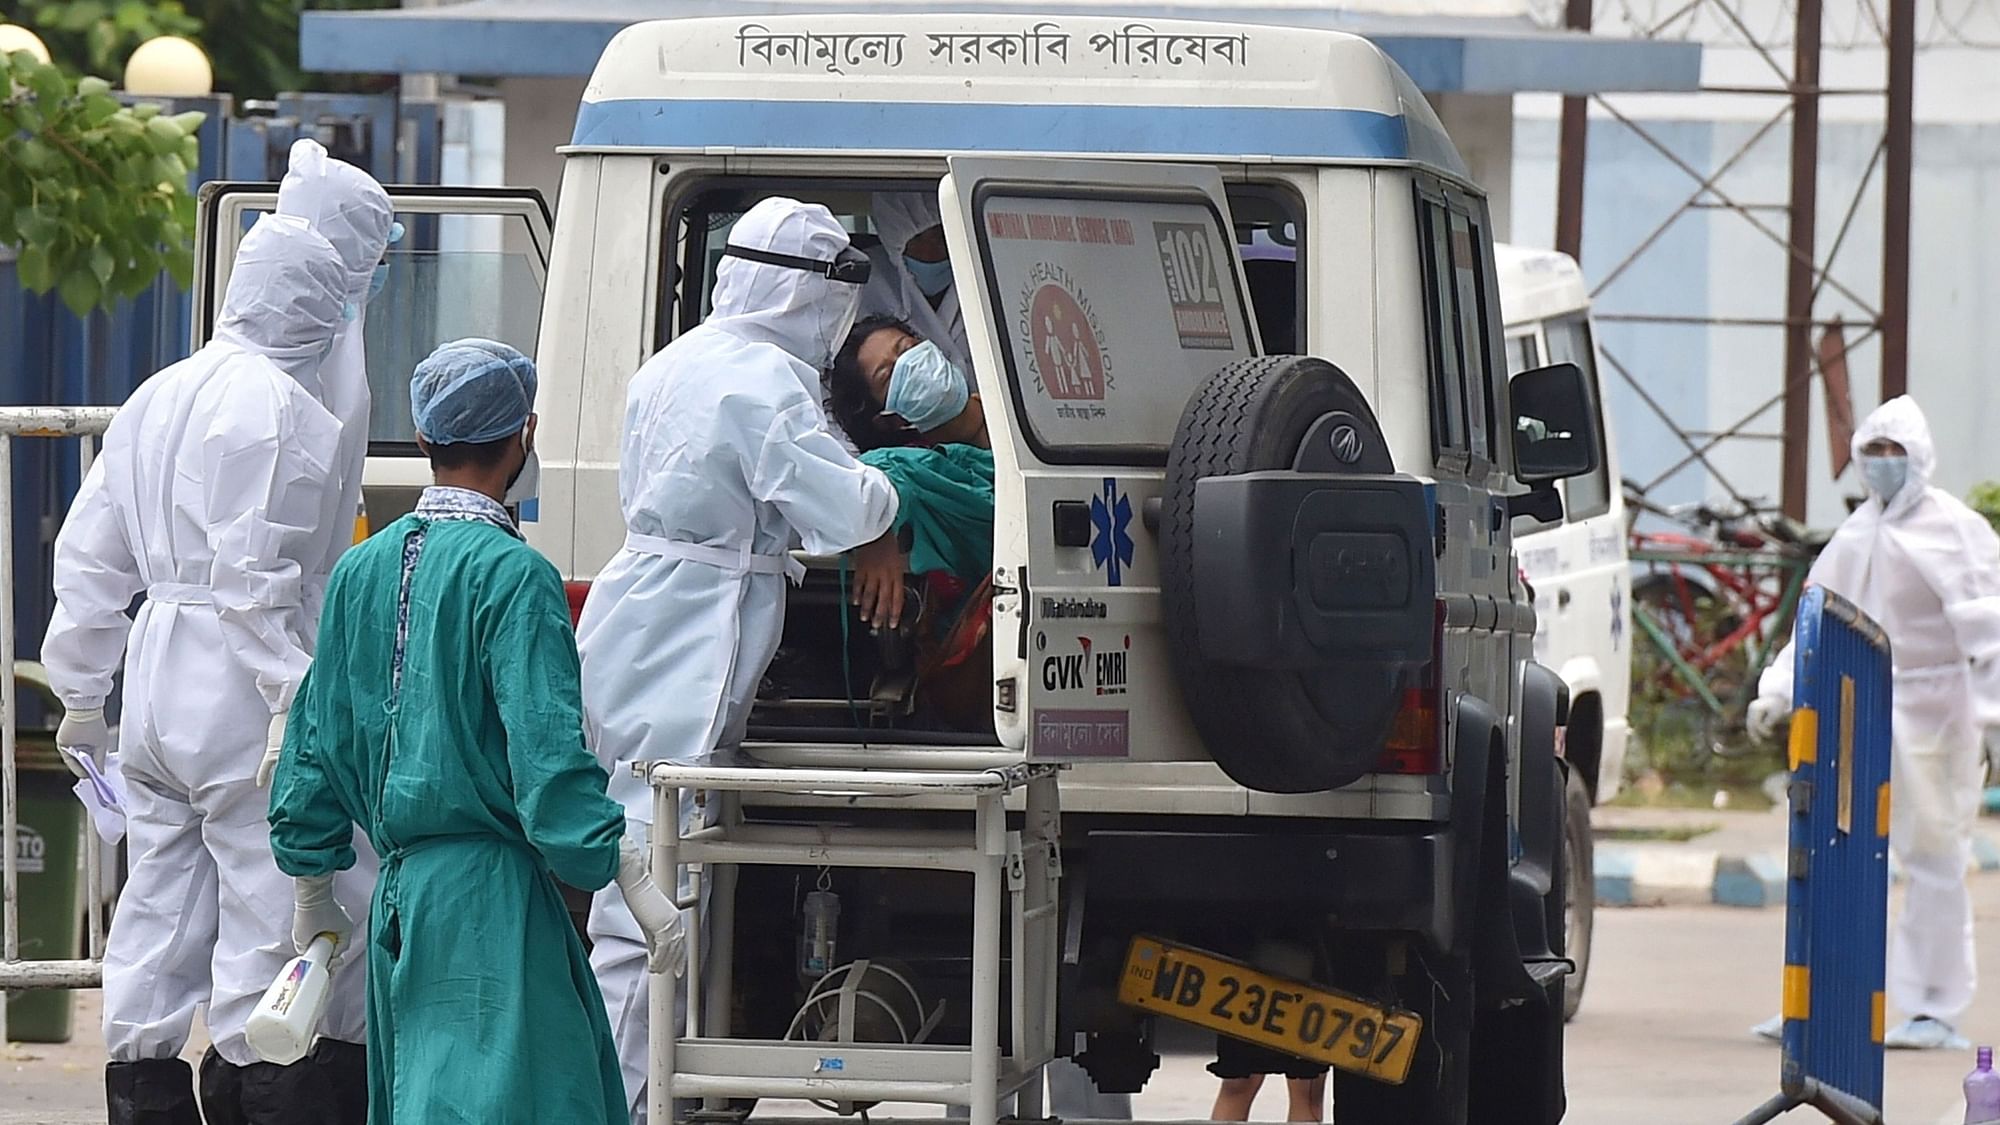 Medics attend to a suspected COVID-19 patient in Kolkata. (Image for representation)